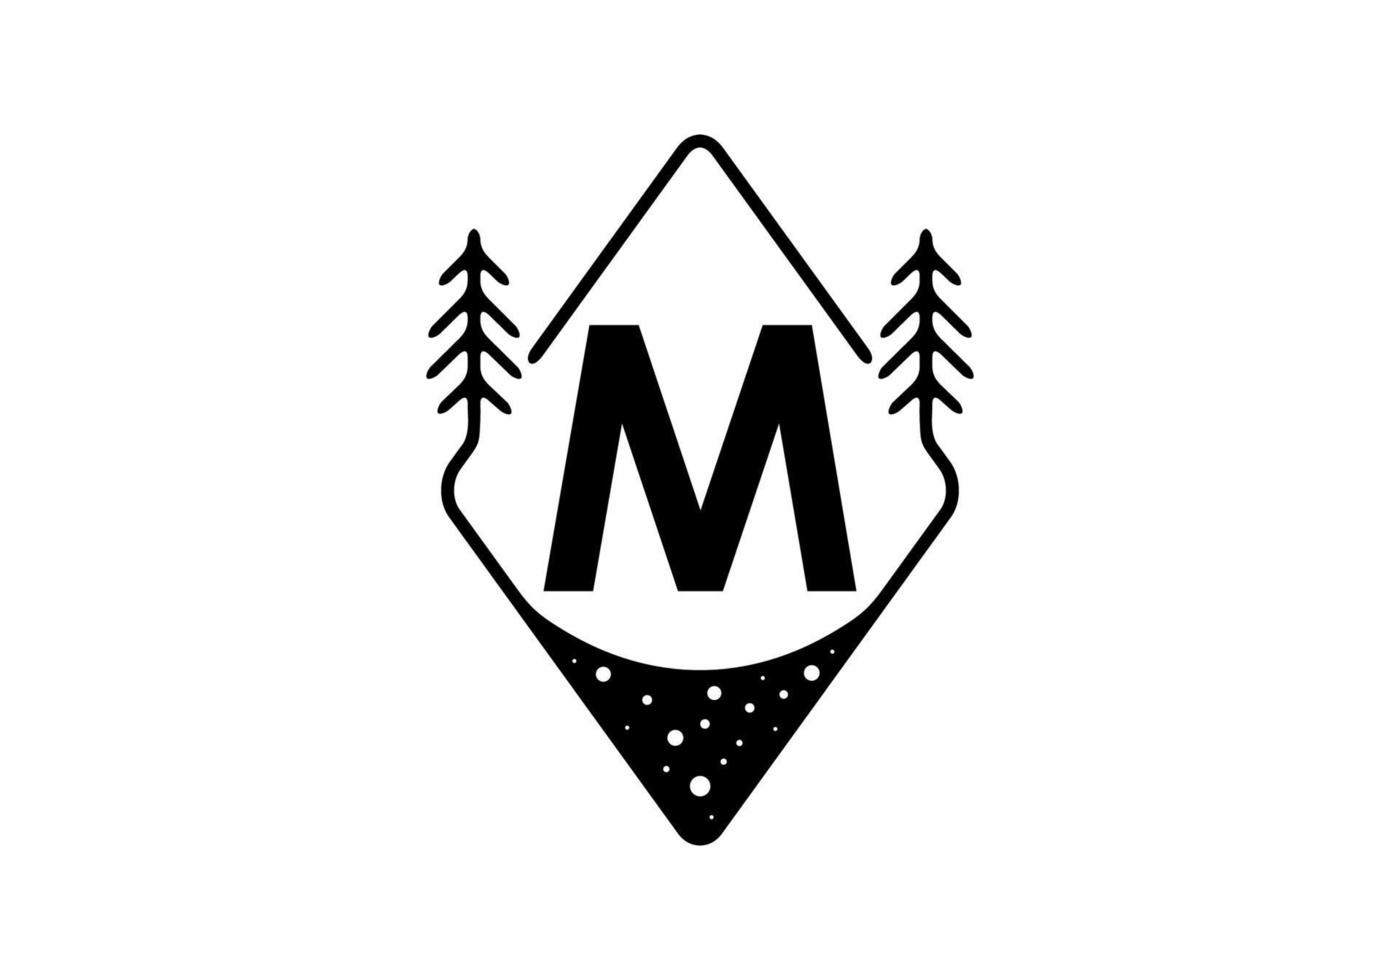 Black line art badge with pine trees and M letter vector